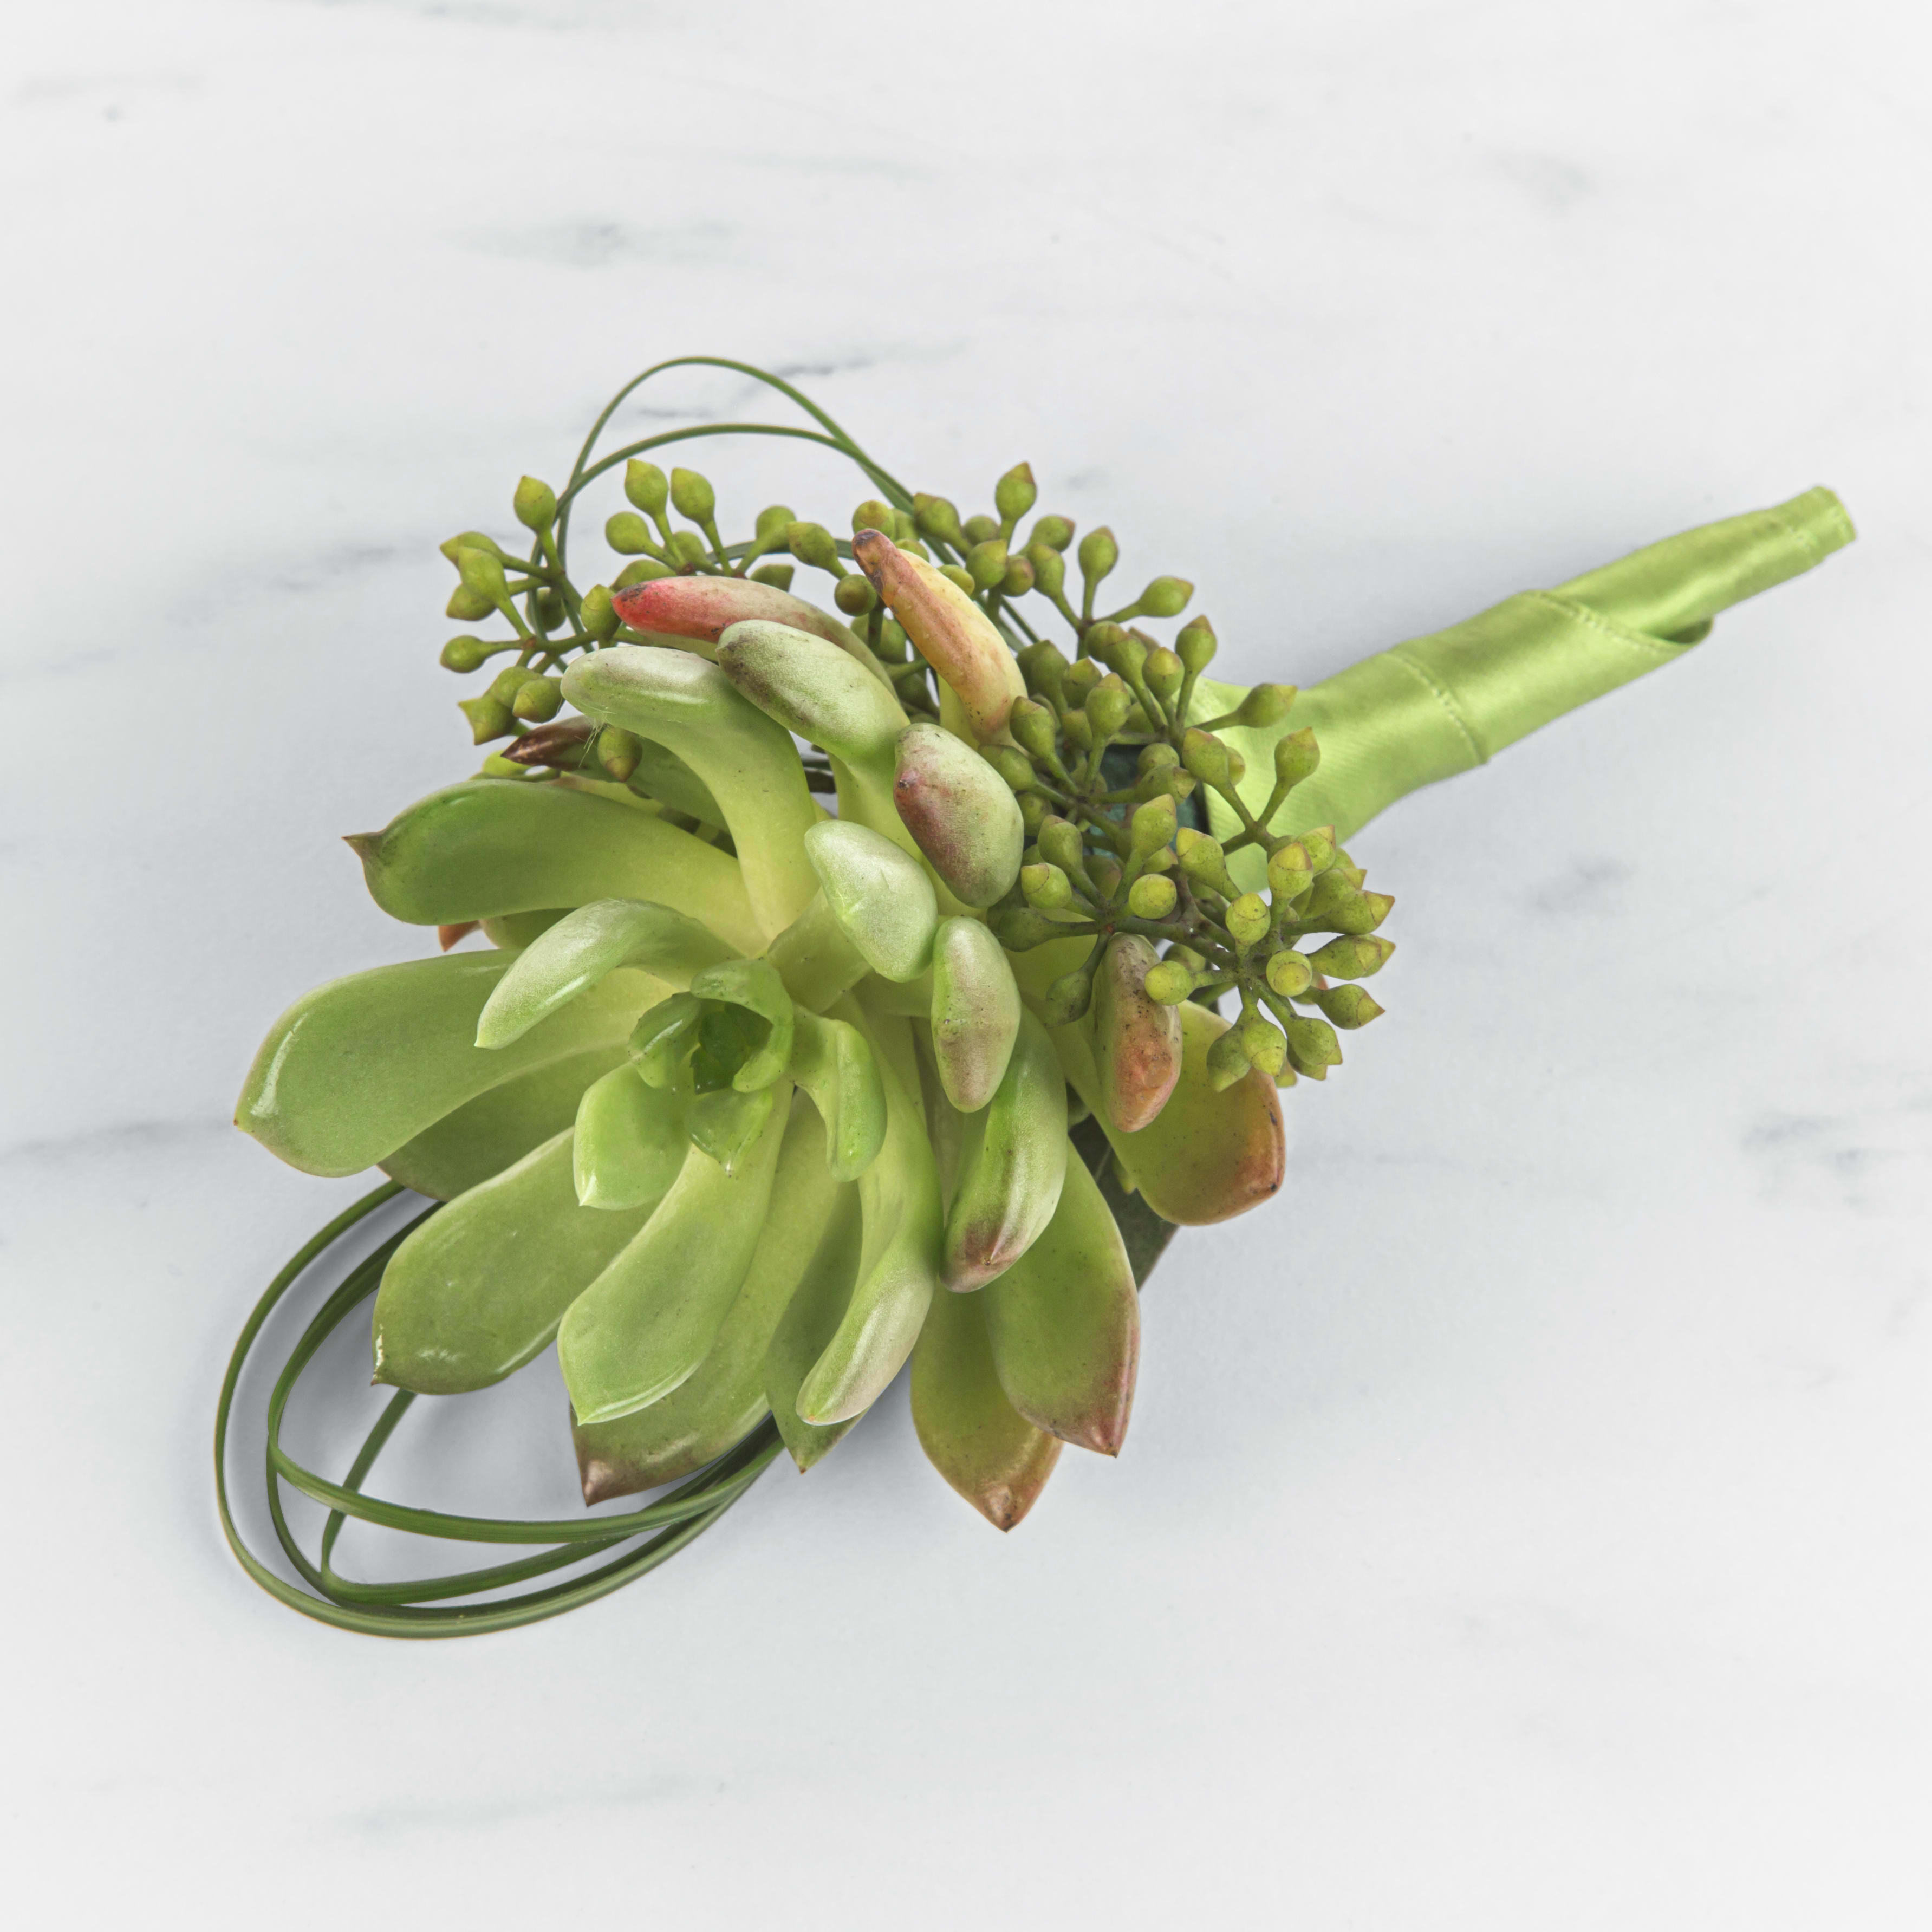 Succulent Boutonnière by BloomNation™ - Show your style with a succulent boutonnière that looks good on any colored suit. Good for prom, weddings and any formal event. 